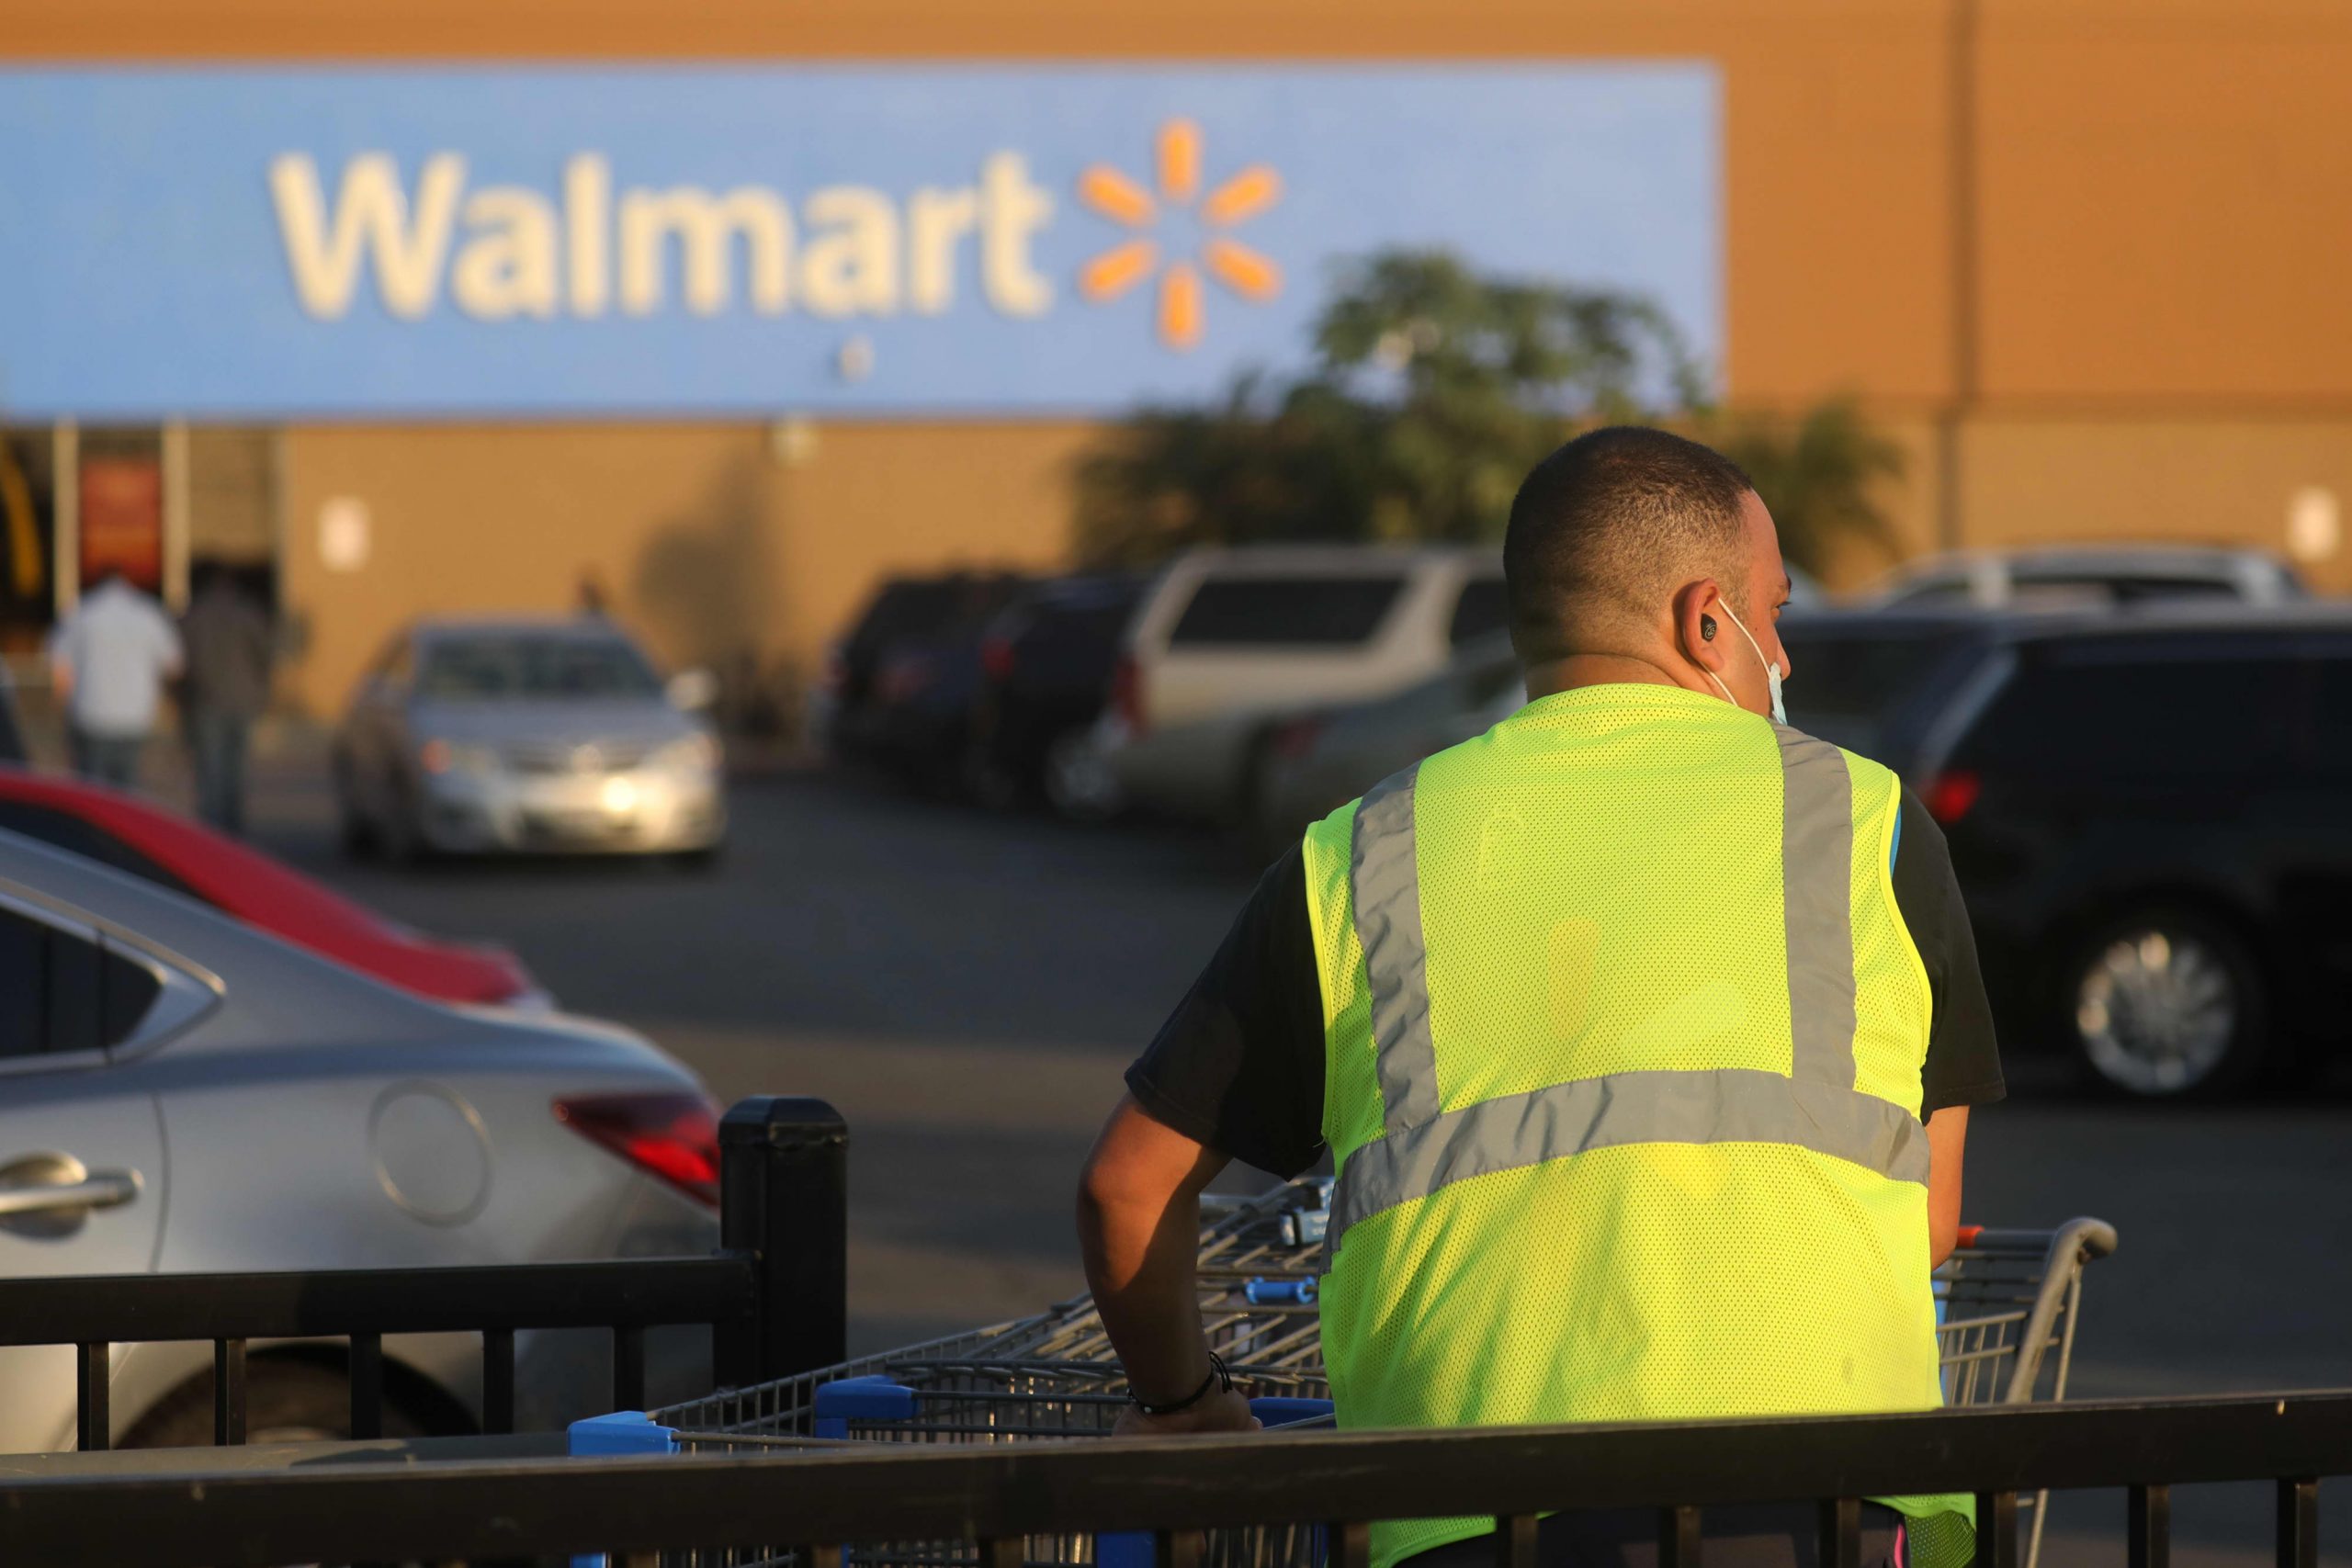 Walmart (WMT) earnings This fall 2021 miss expectations